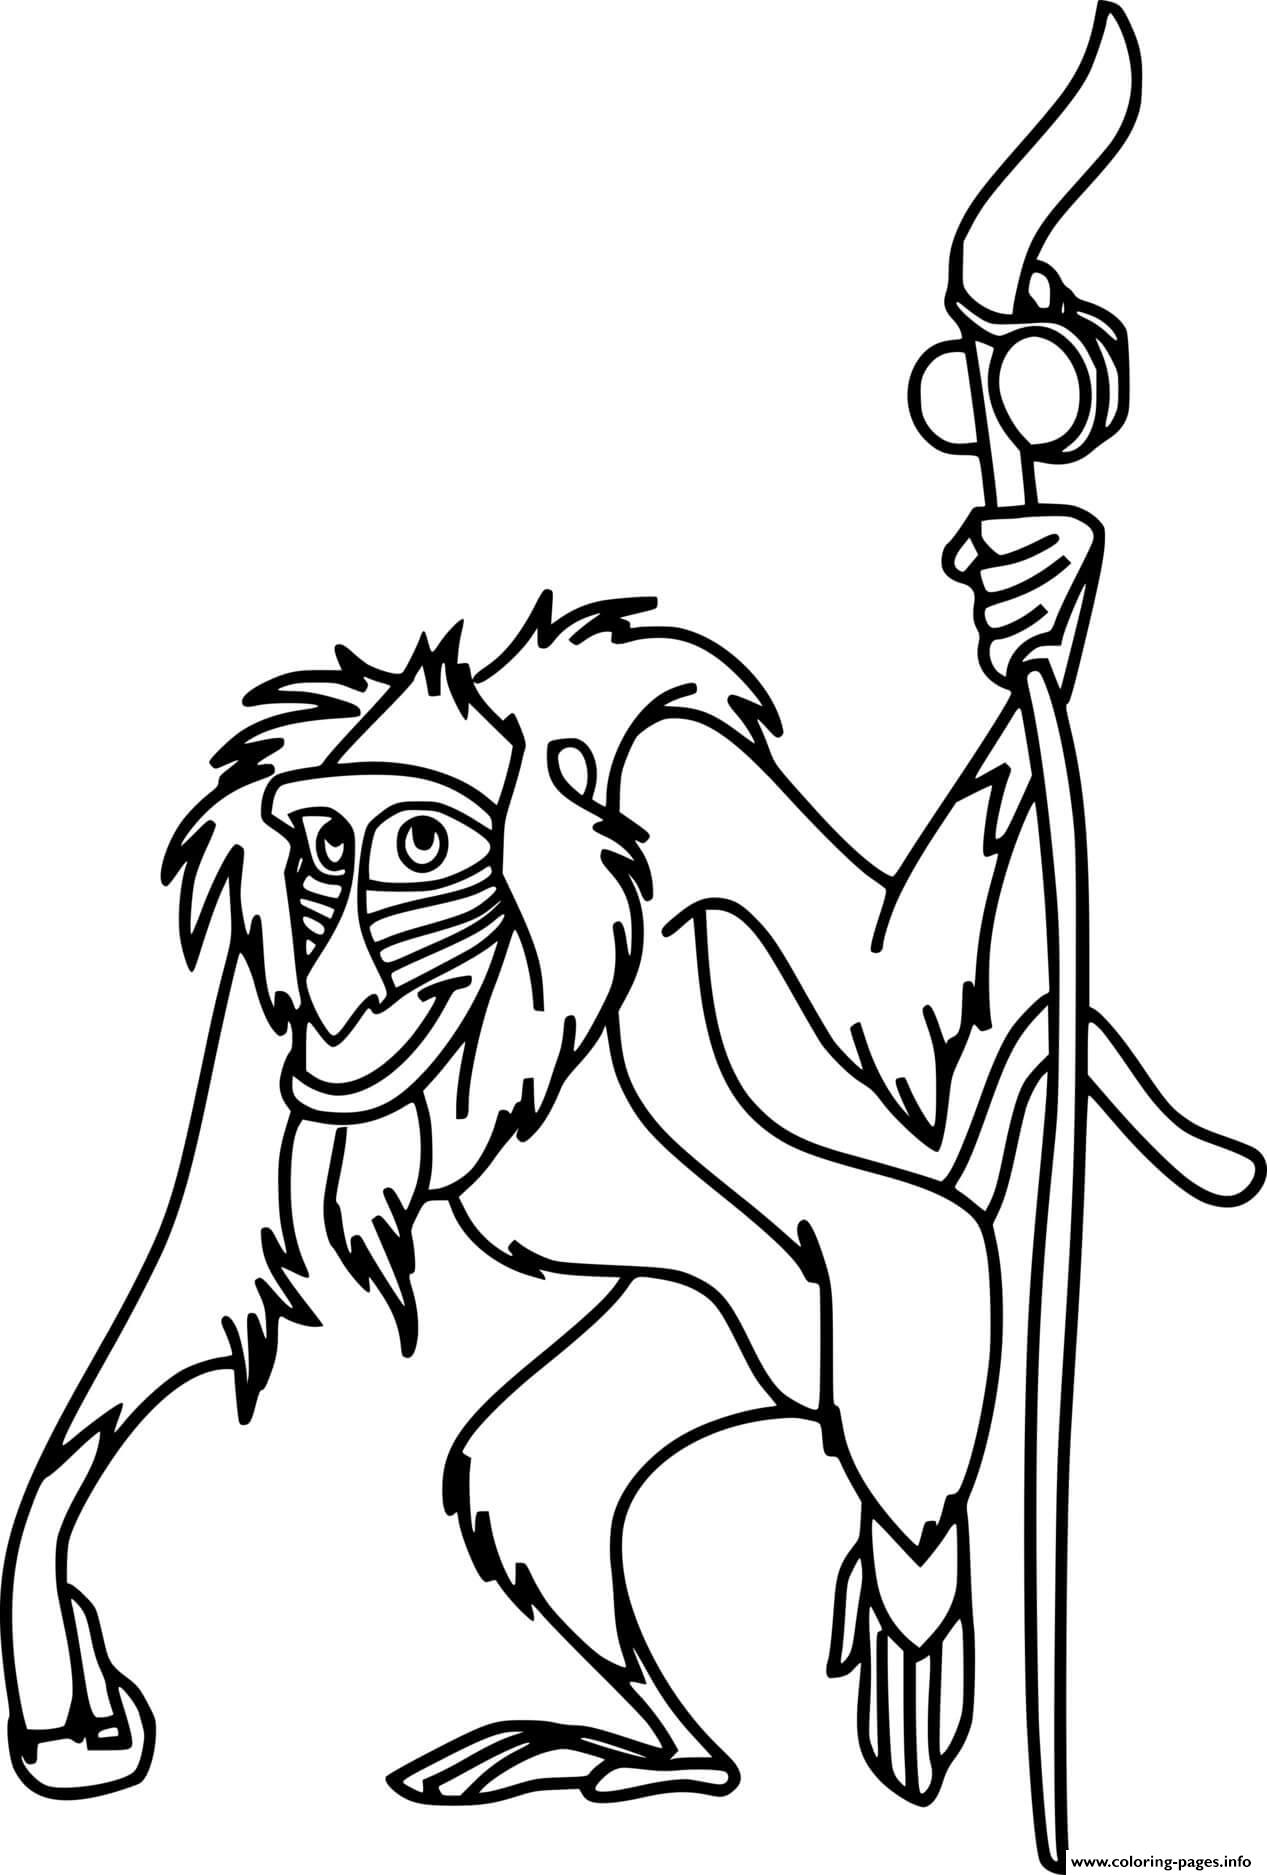 Rafiki Holds His Cane coloring